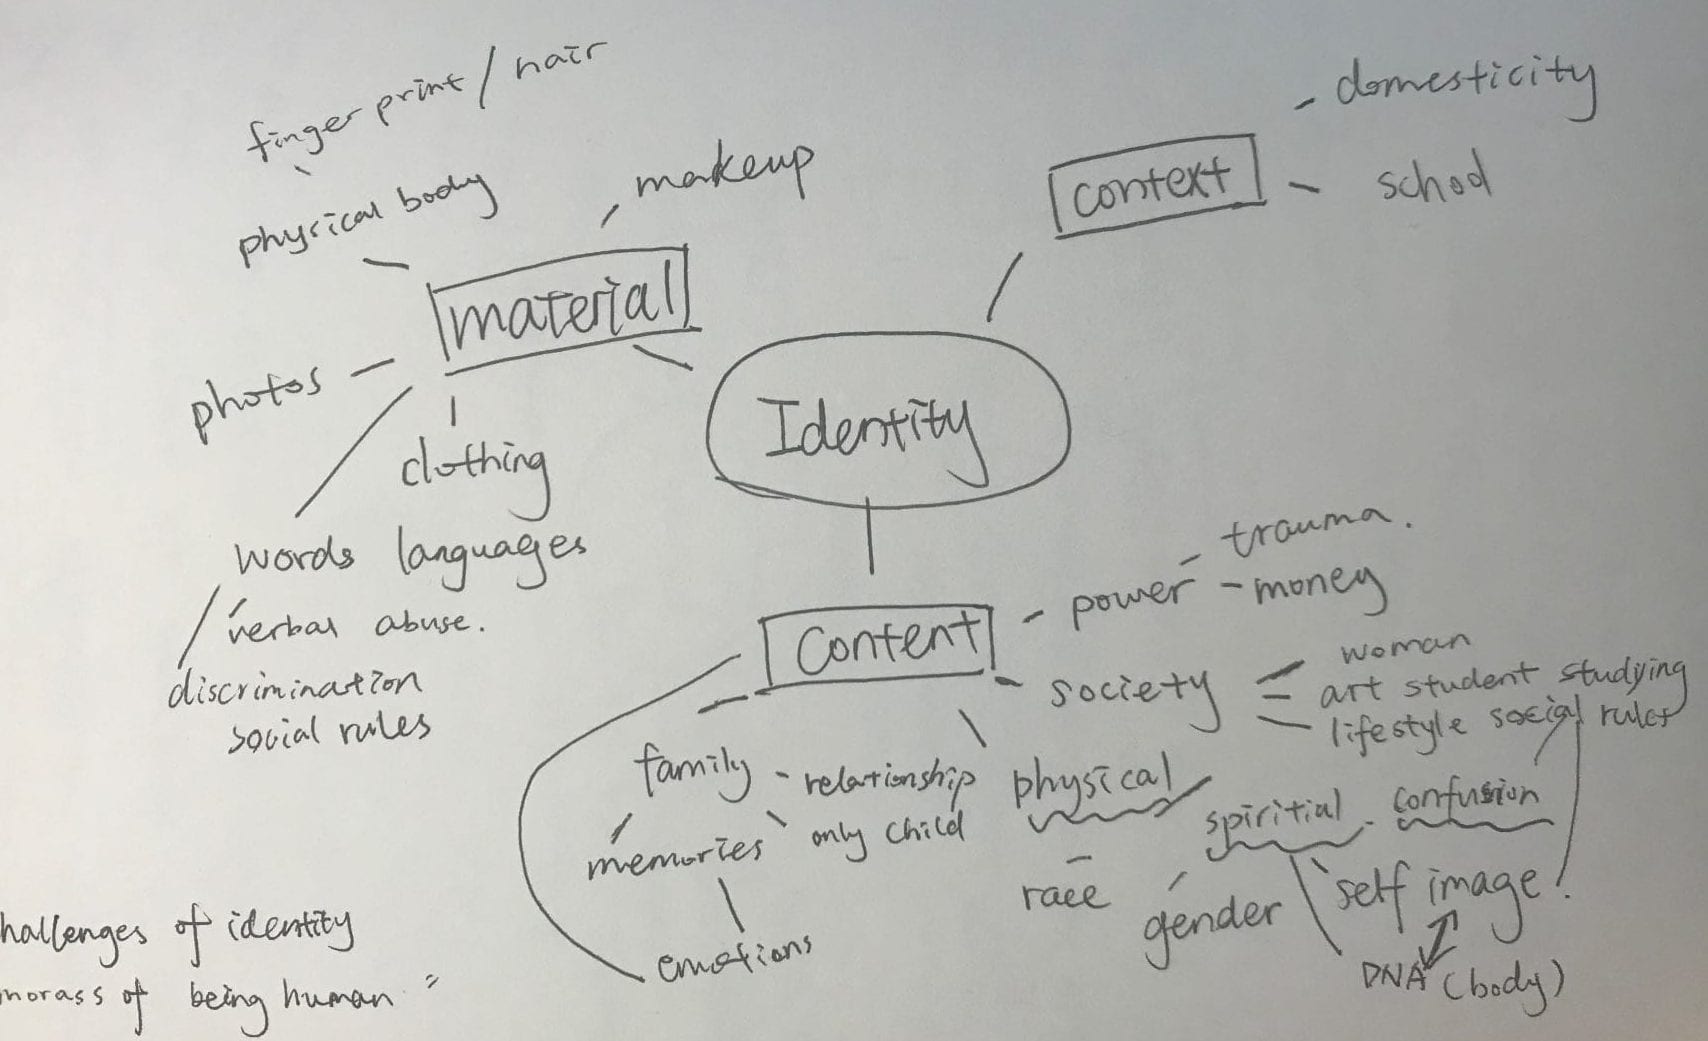 20 Qs for Studio and Seminar + Mind Map